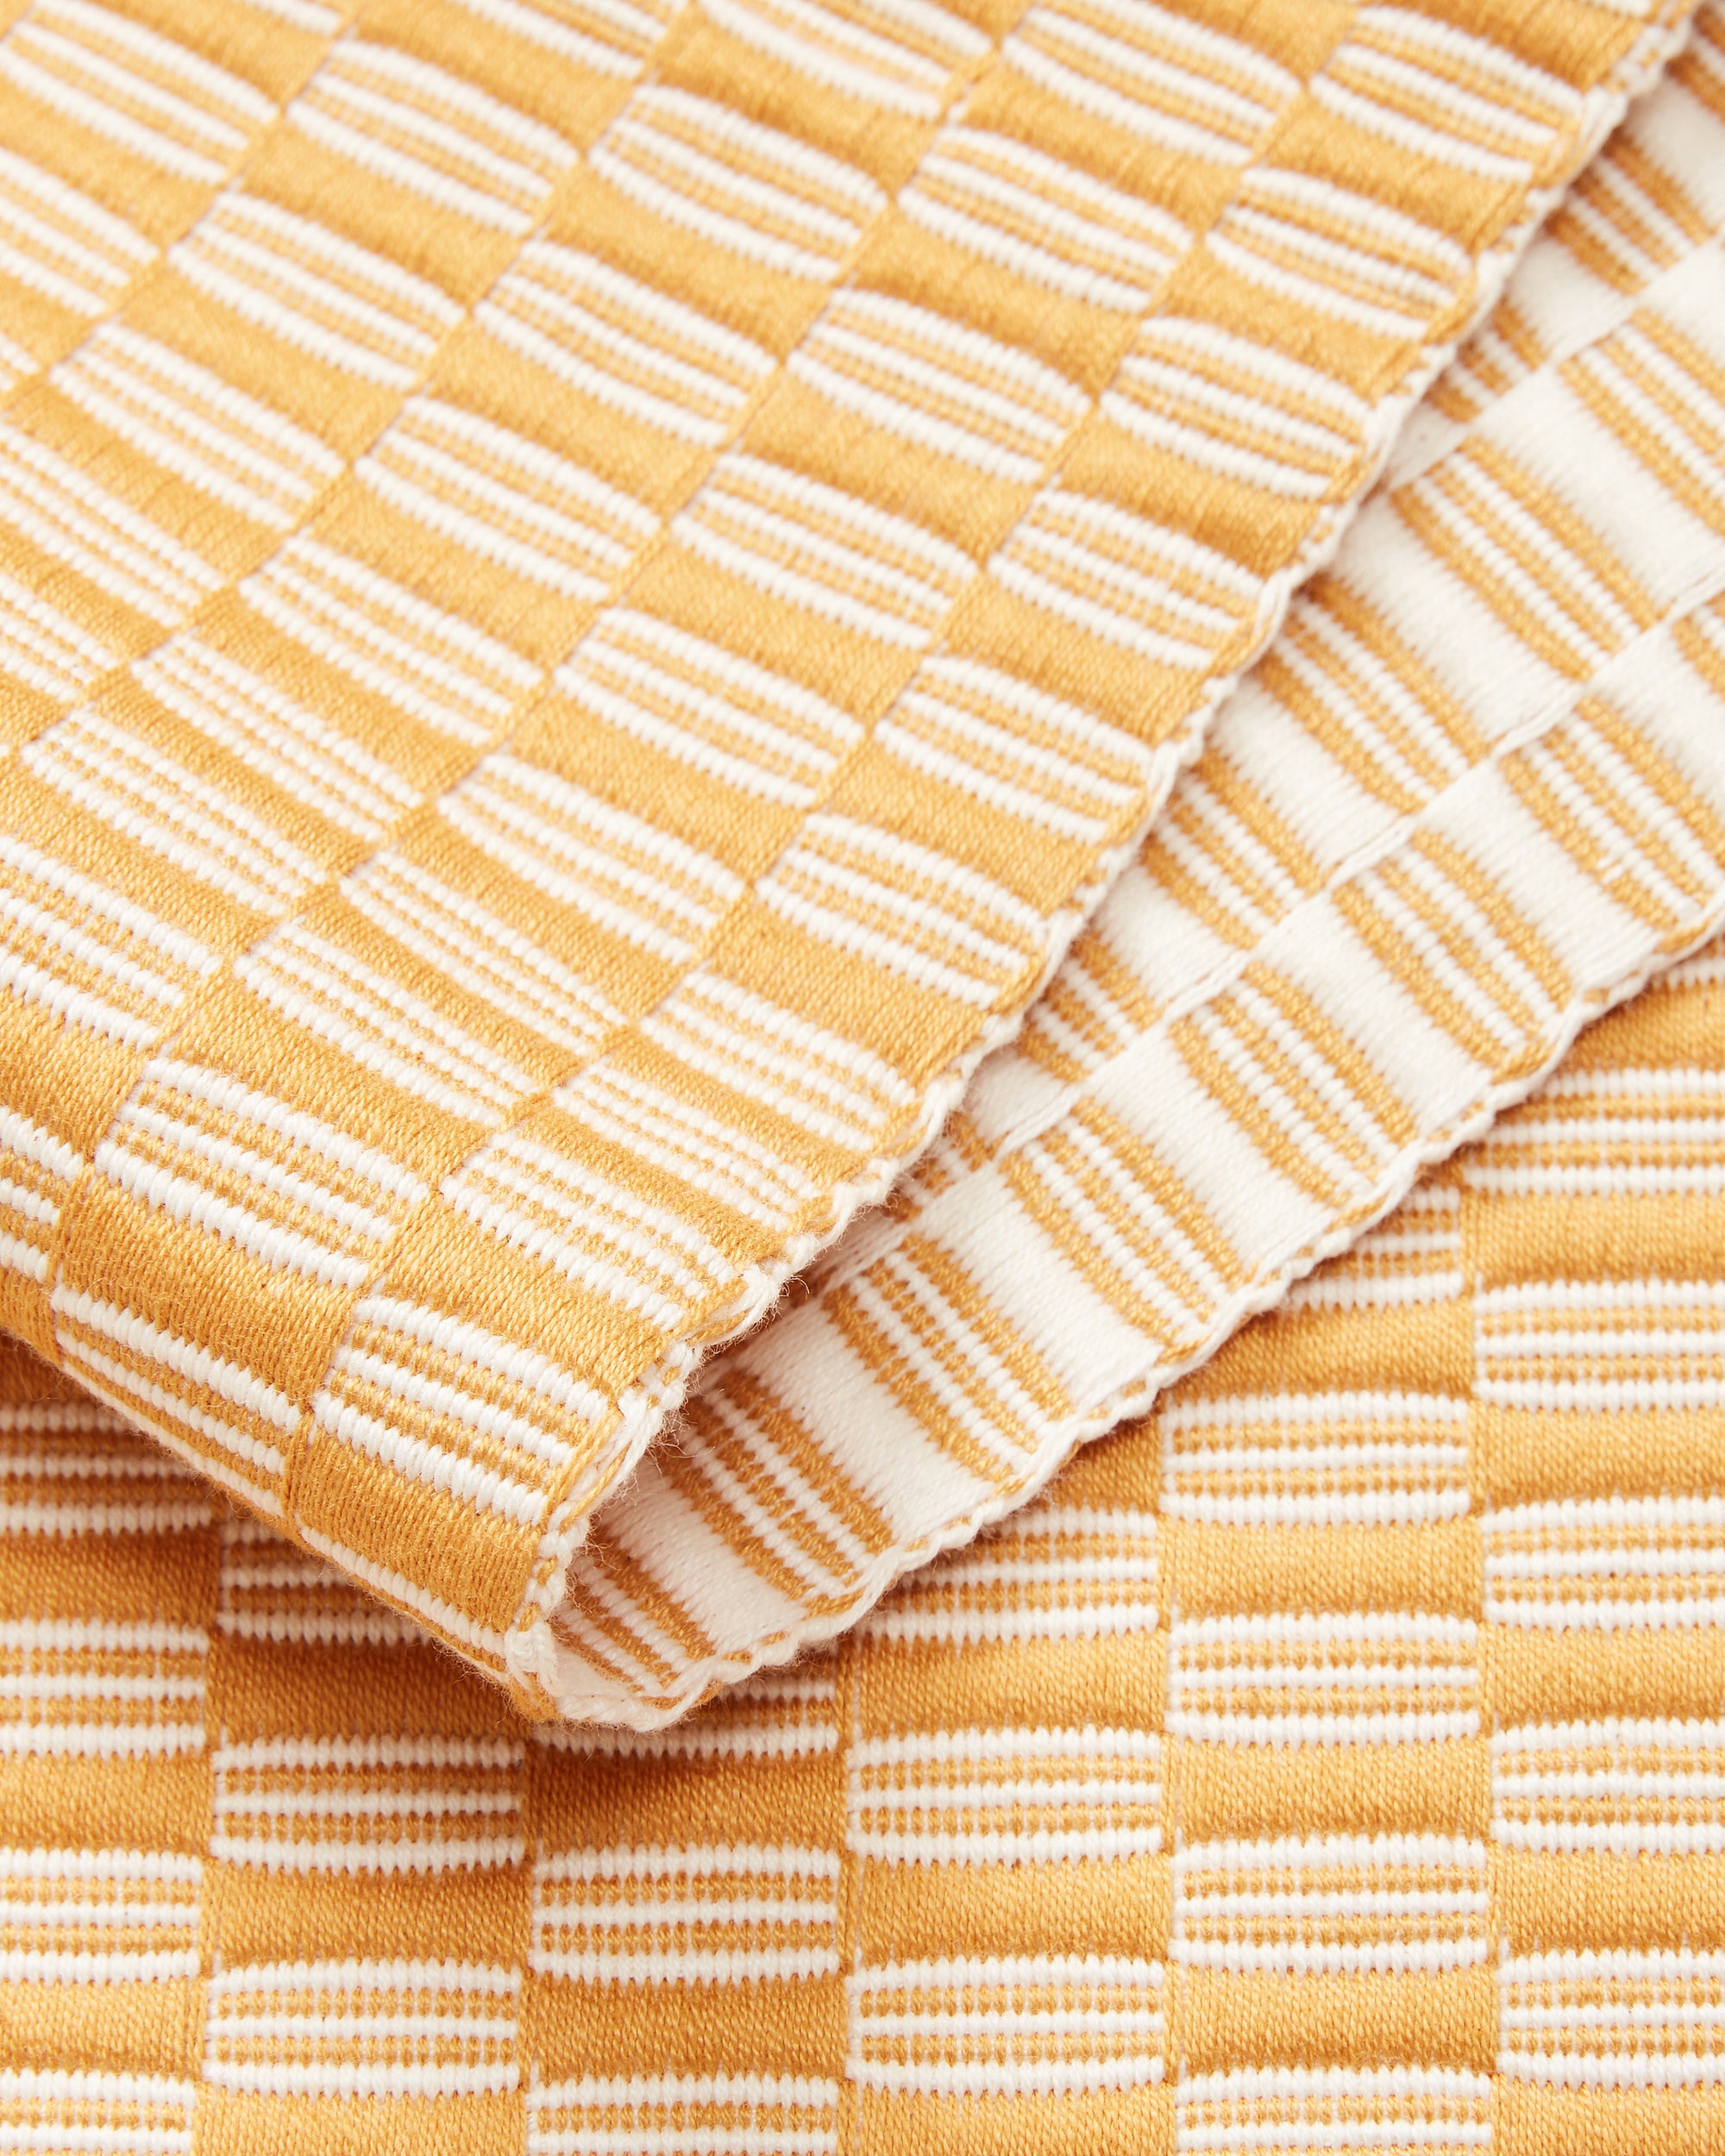 Ethically handwoven table runner cotton panalito gold MINNA, detail